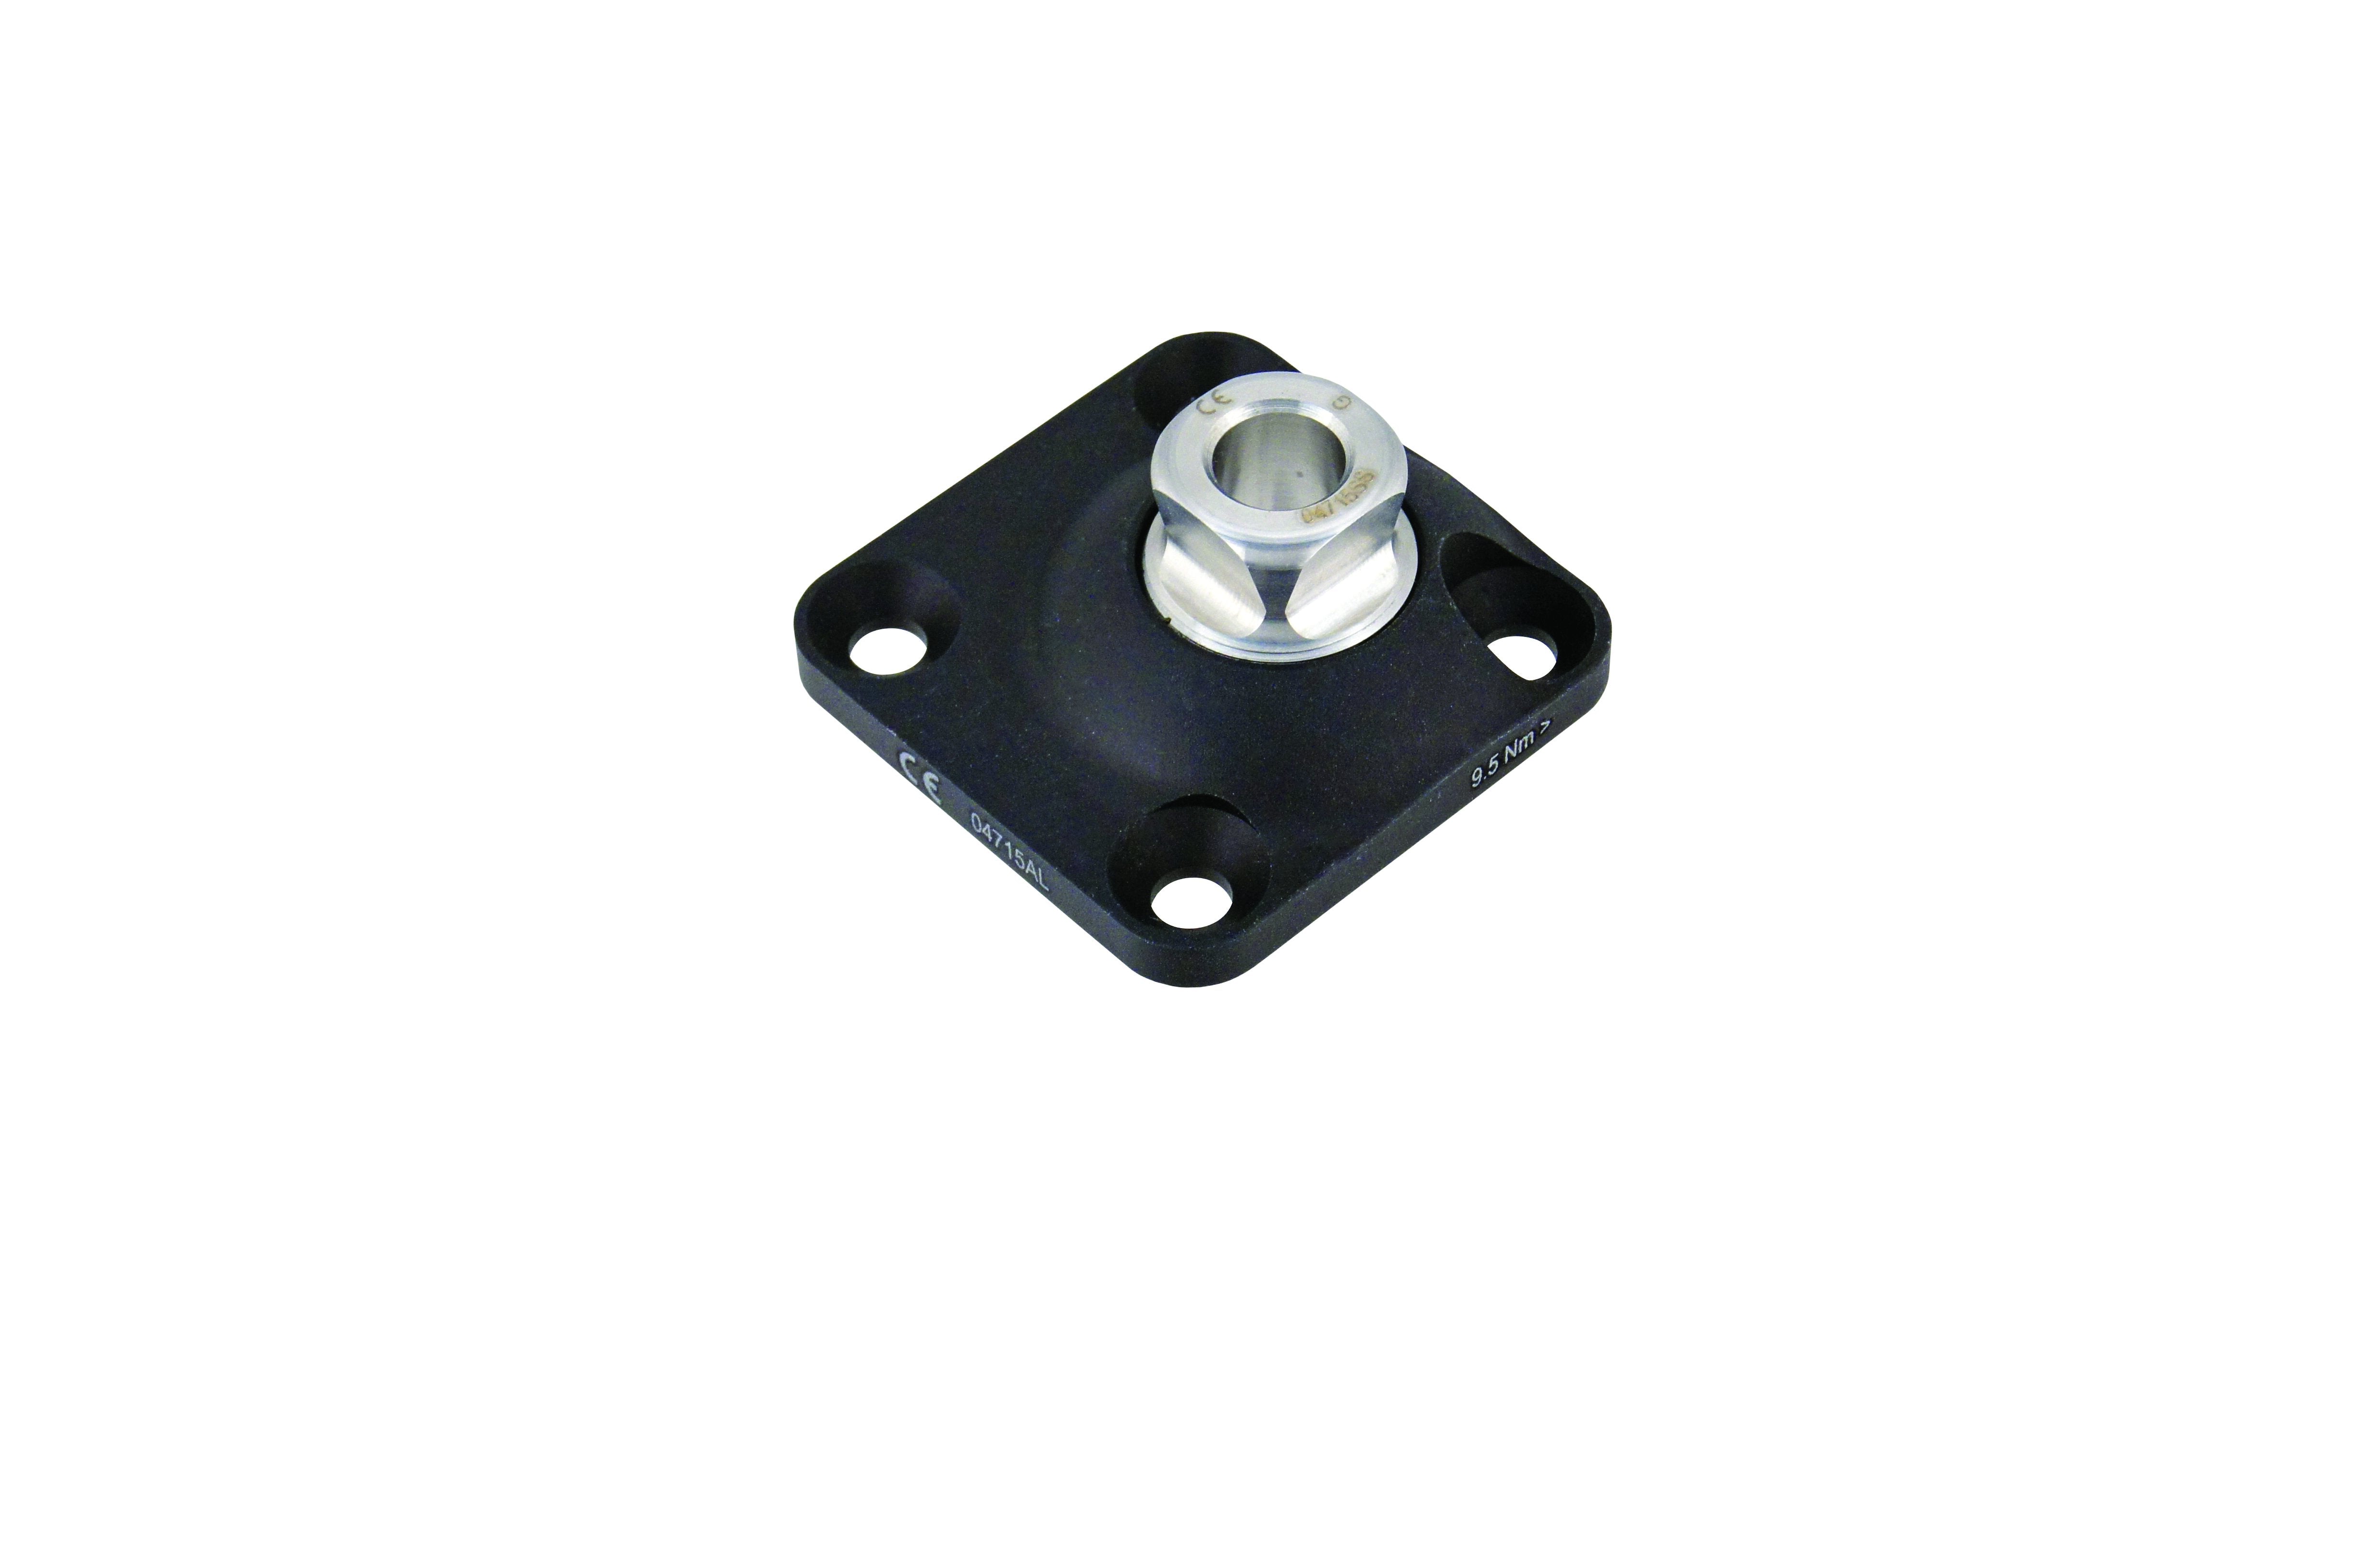 AAA208 4-Hole Double Offset Pyramid Adapter